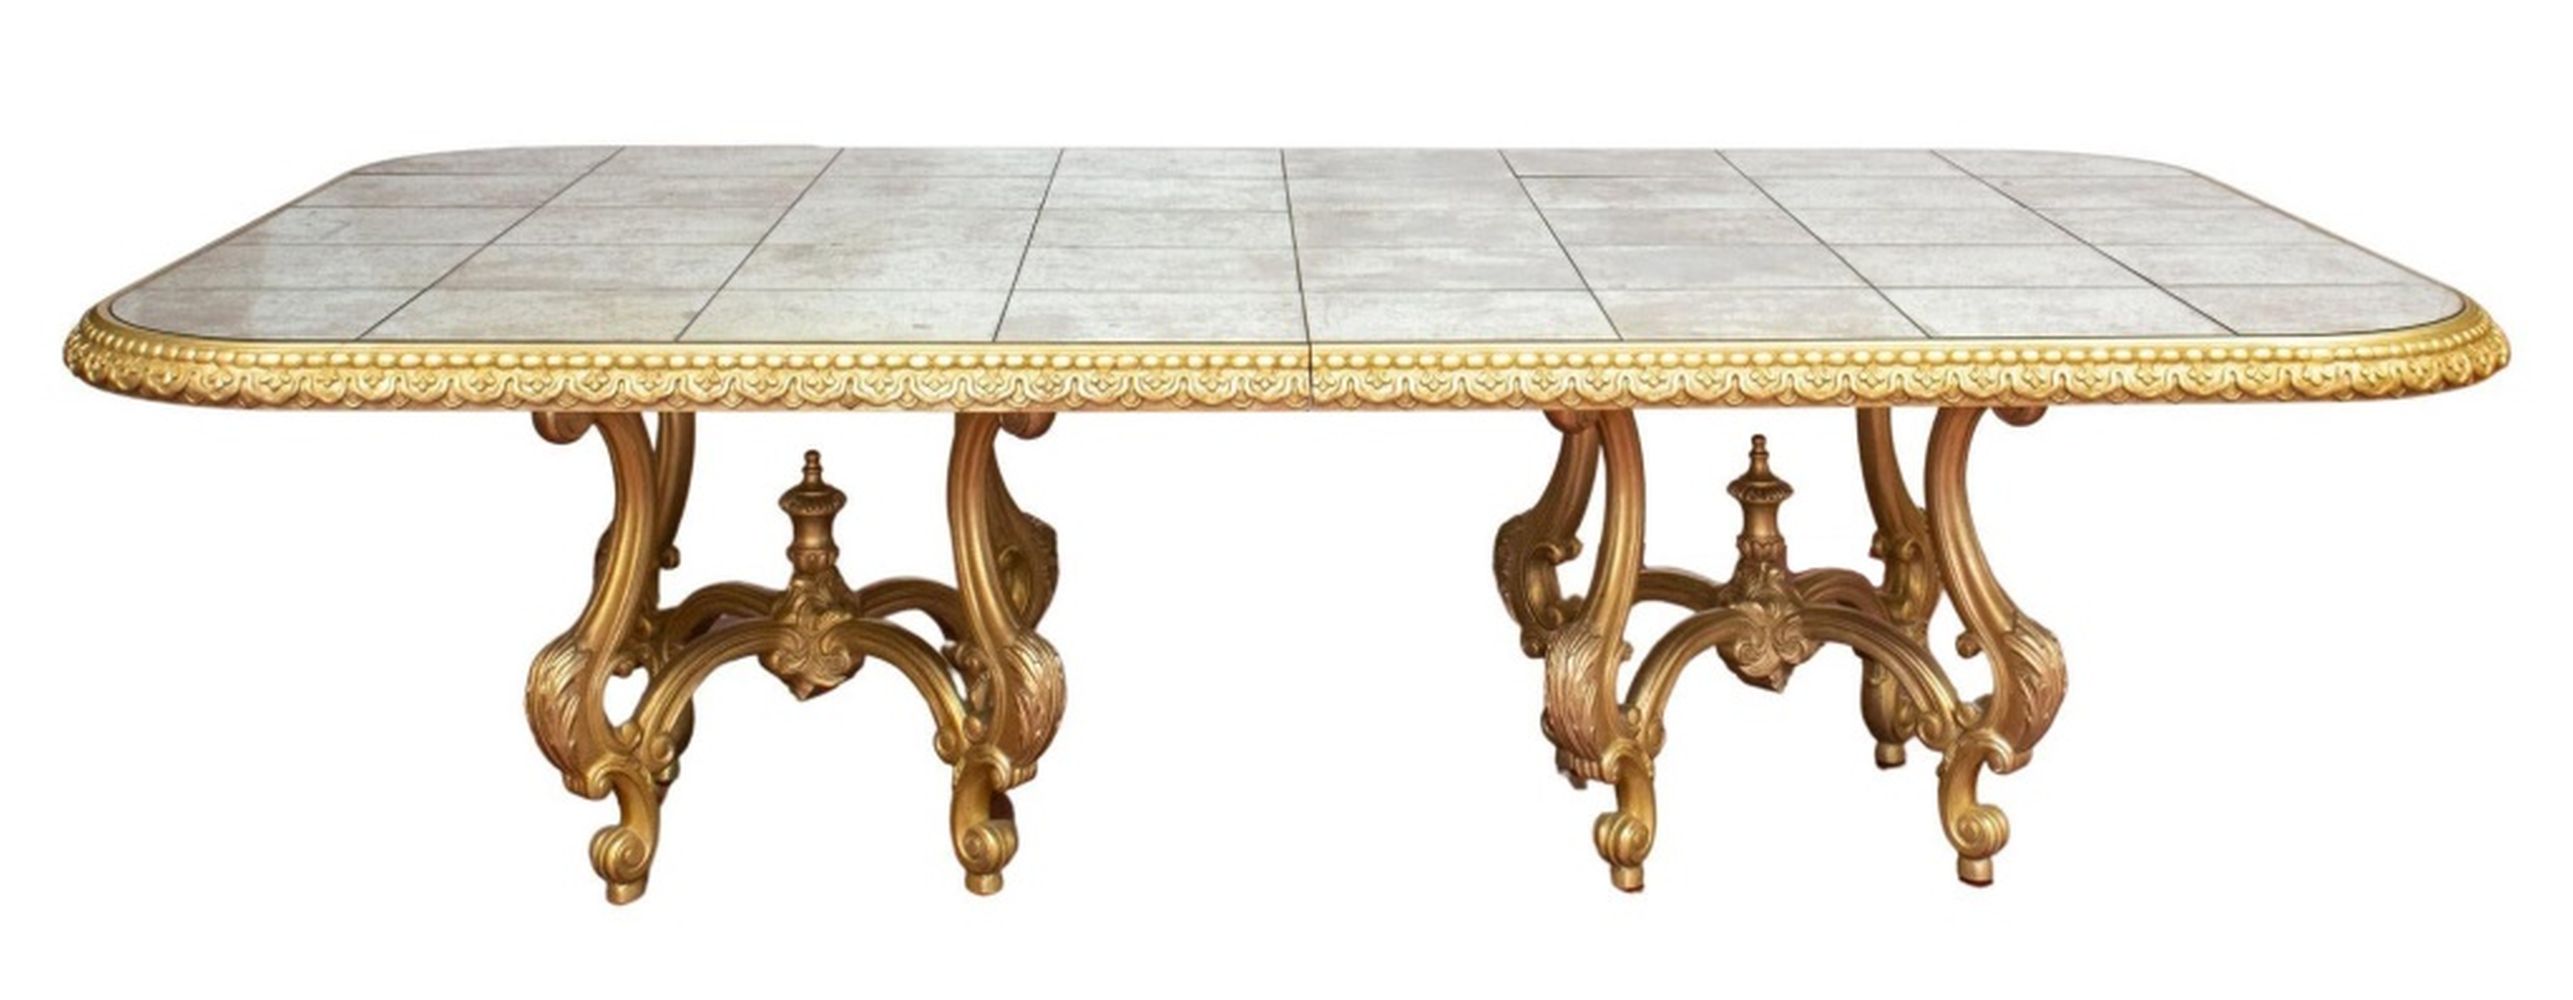 VENETIAN BAROQUE STYLE DINING TABLE 2fbfd9